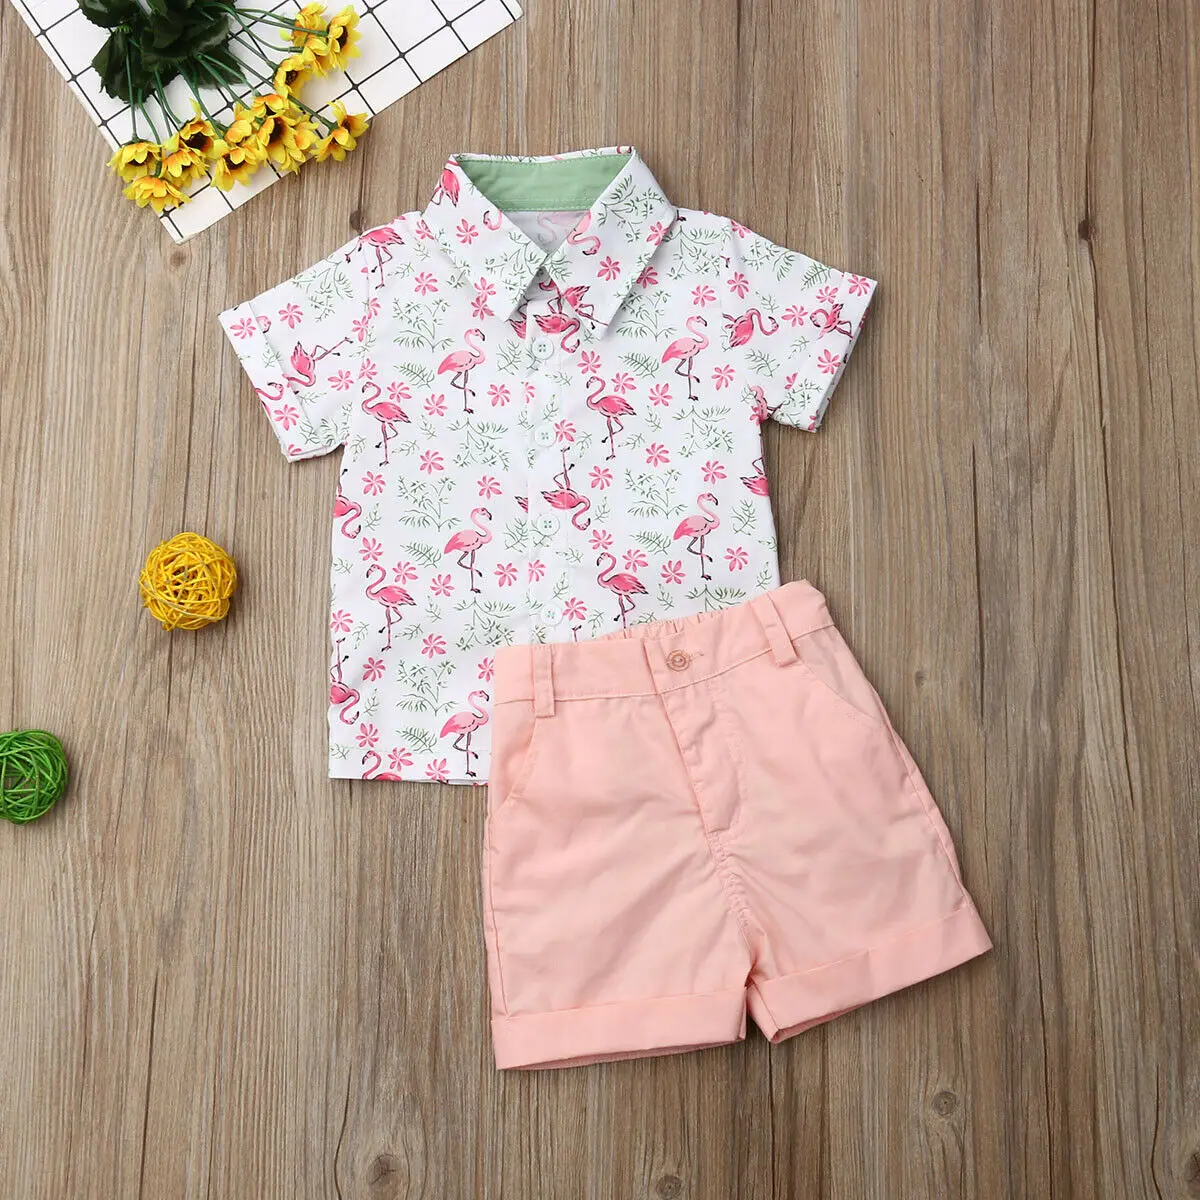 

Toddler Kids Baby boy clothes set Summer Clothing Flamingo Shirt Tops Short Bottoms Formal Party 2PCS Sets Outfit Clothes 1-5Y